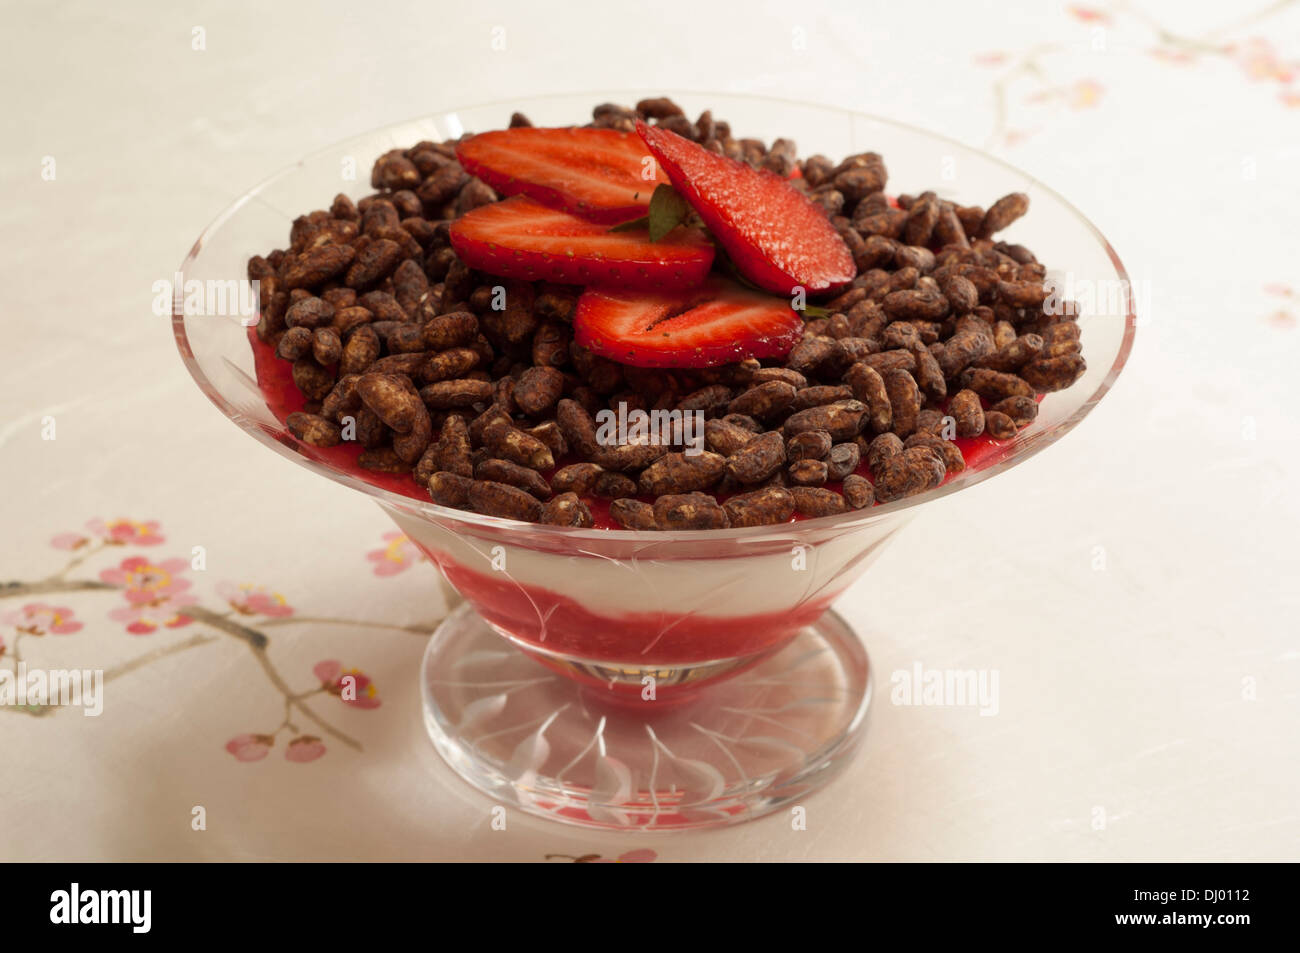 Yoghurt mousse and puffed cereals with strawberry sauce Stock Photo